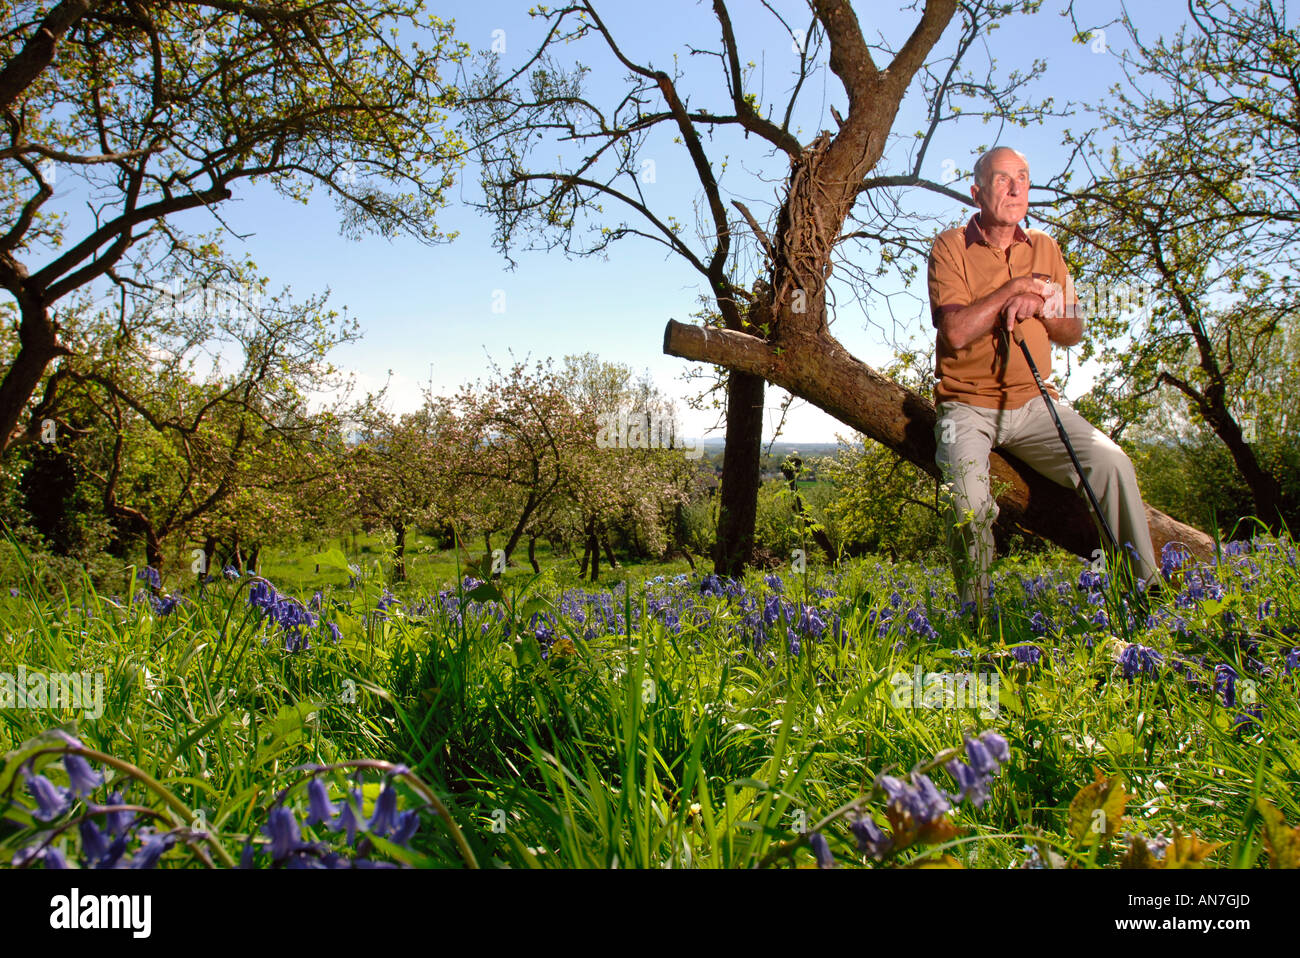 A RETIRED MAN IN A COMMUNITY ORCHARD GLOUCESTERSHIRE ENGLAND UK WITH APPLE TREES IN FULL BLOSSOM Stock Photo